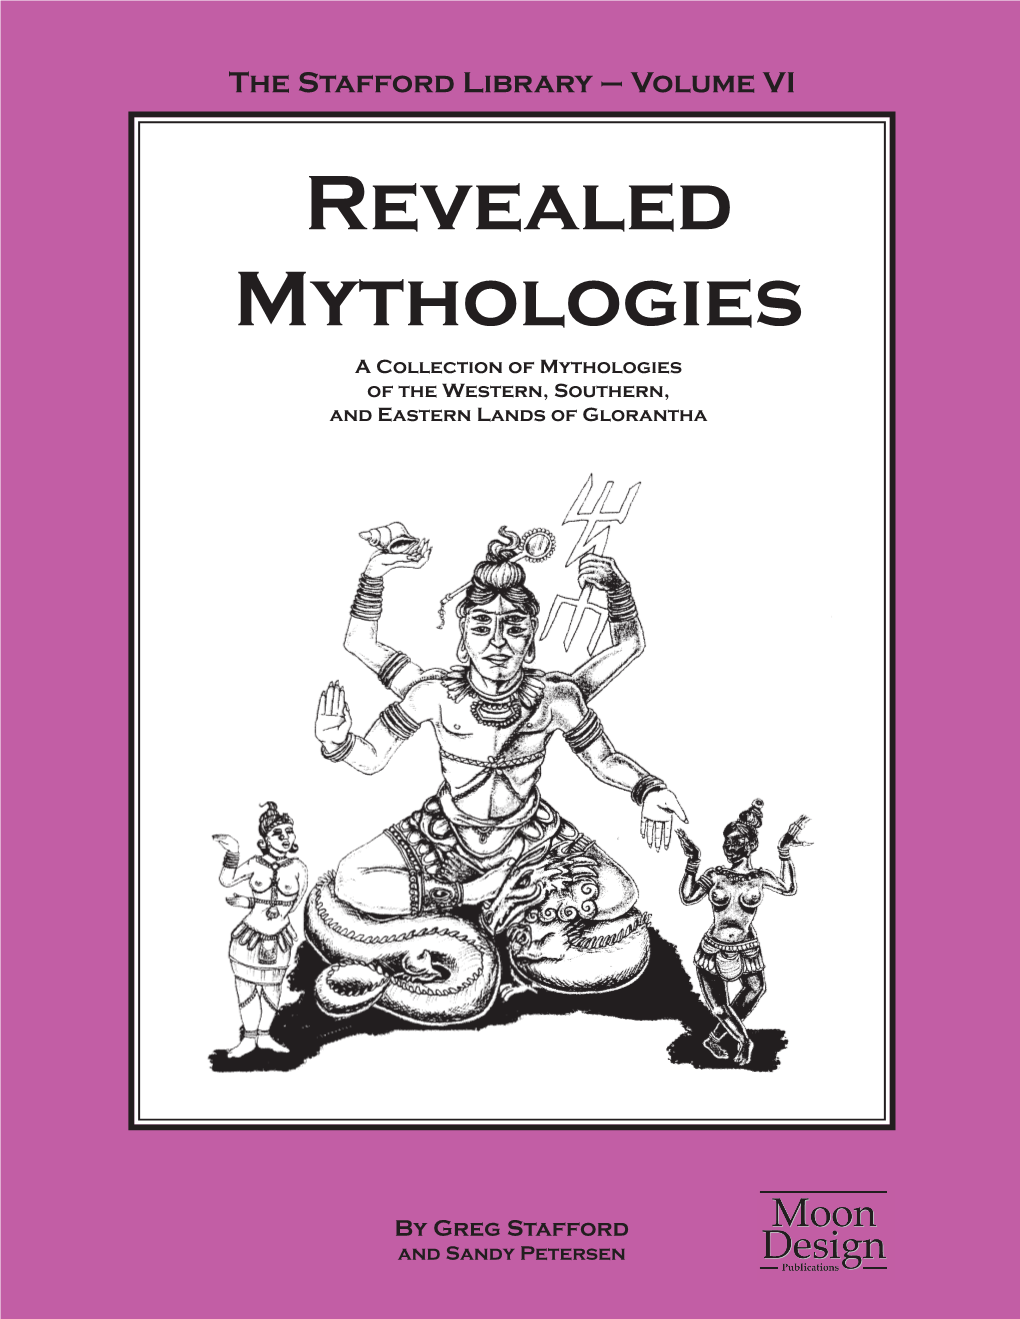 Revealed Mythologies Places, Institutions and Legends of the Land